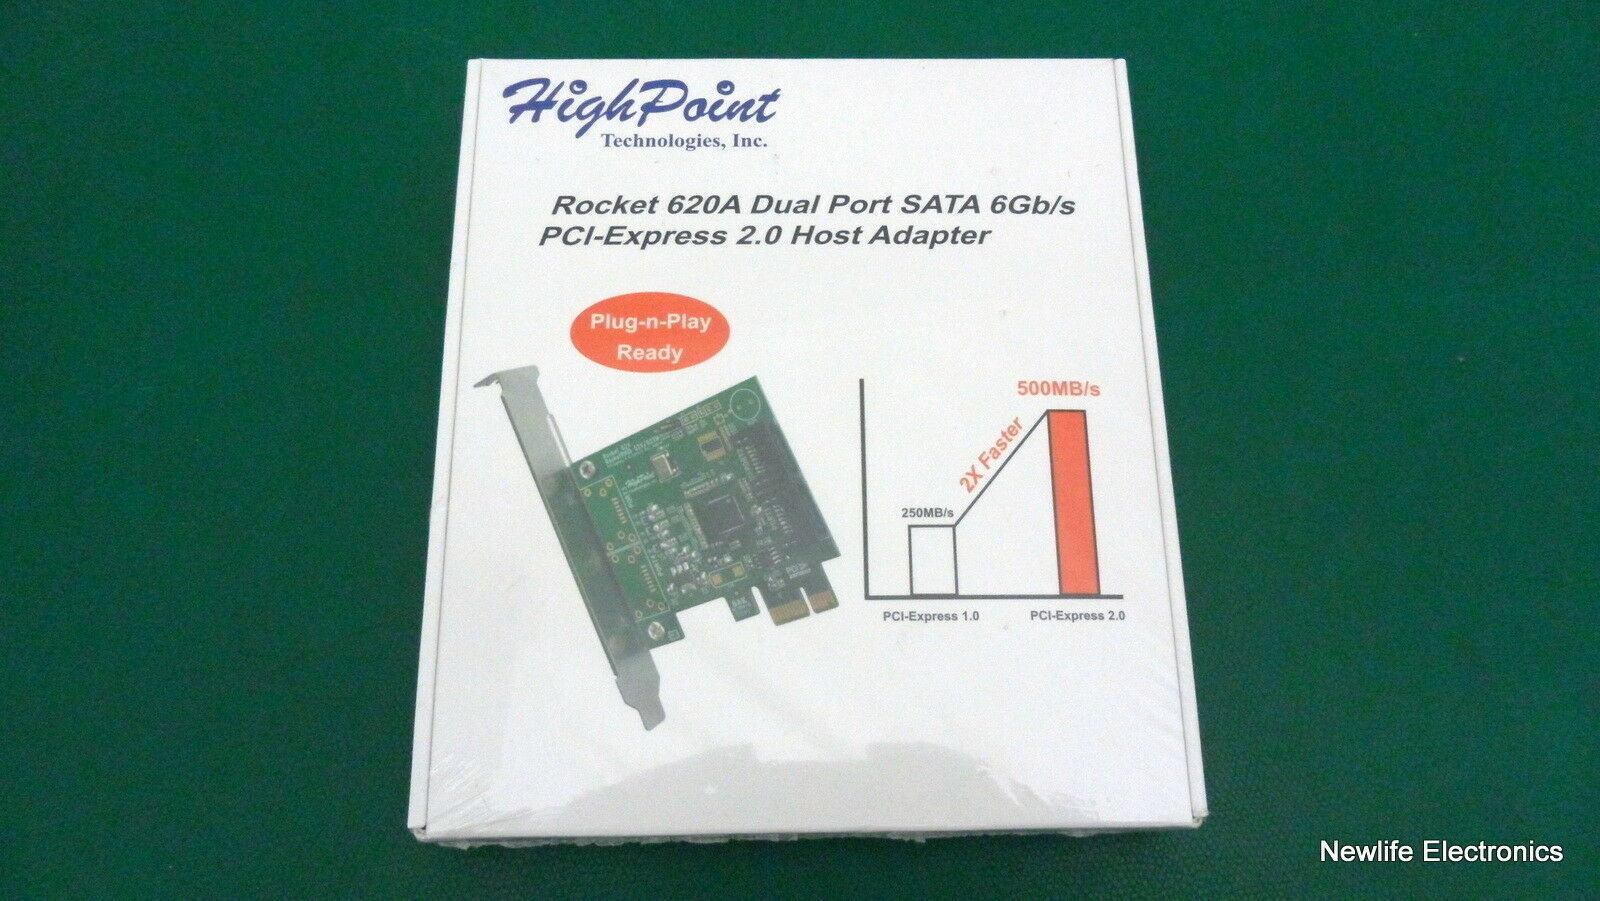 (New) High Point Technologies Rocket 620A 2-Port SATA 6Gb/s PCIe Host Adapter